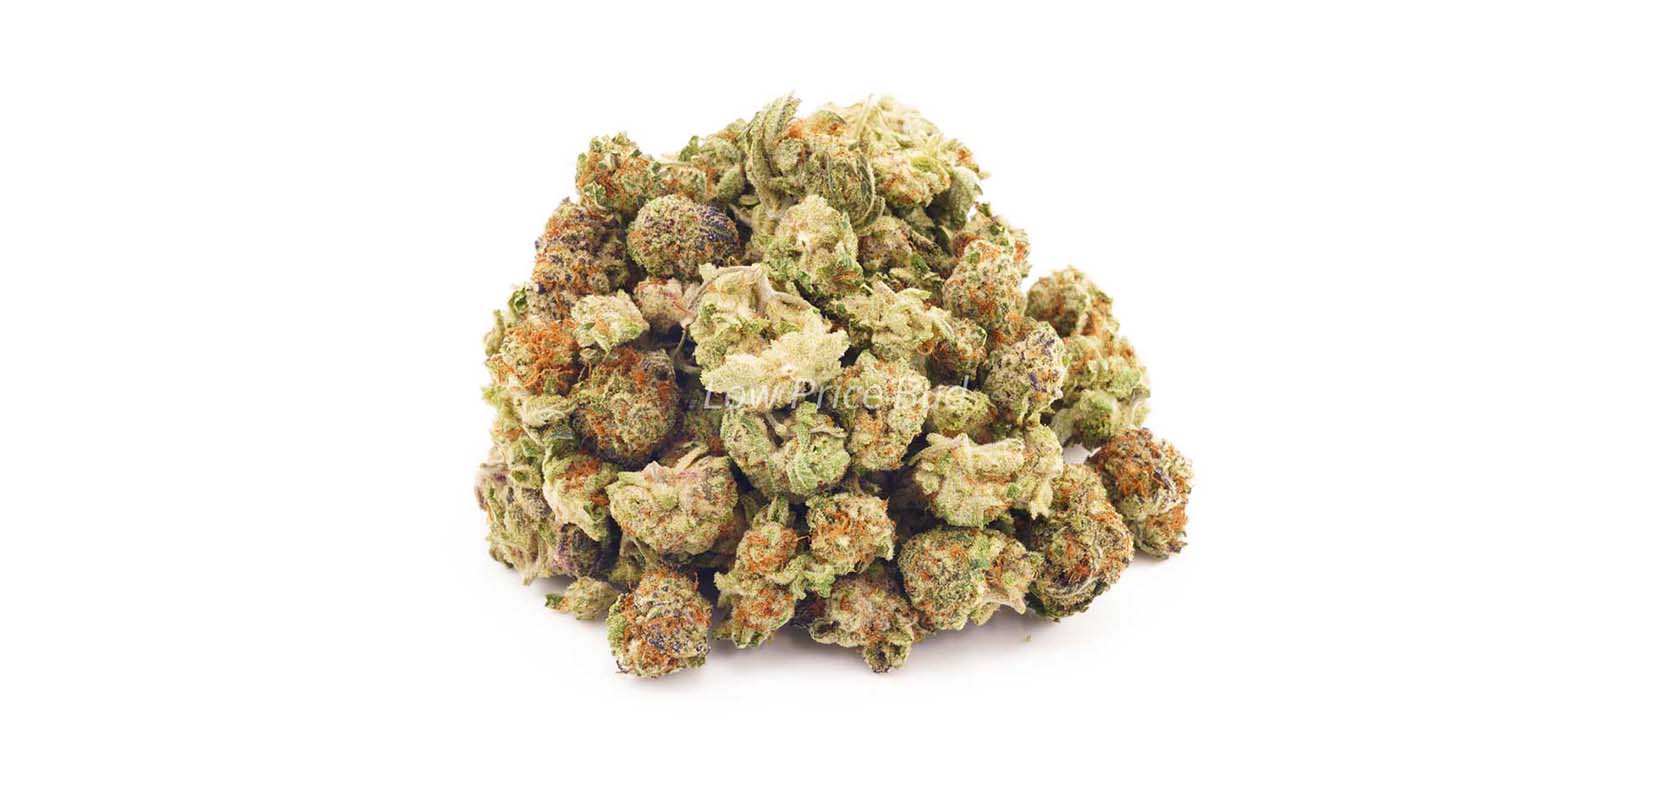 Sour Patch Kids budget bud. Buy weed online at Low Price Bud weed dispensary for BC cannabis. Buy weeds online. Shatter and shatter weed shatter drug for sale. 